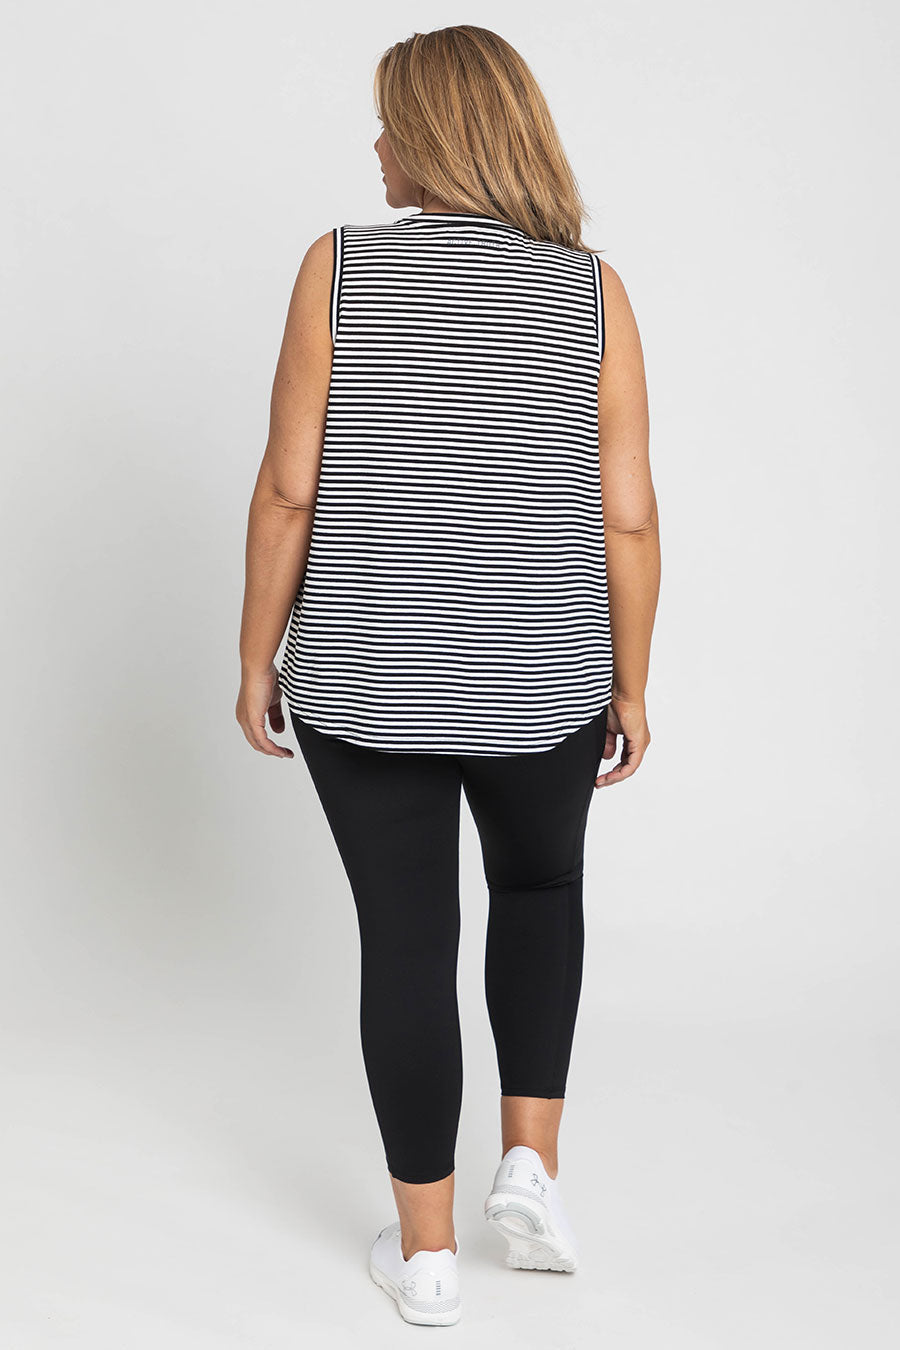 Classic Sleeveless Top - Stripe from Active Truth™
